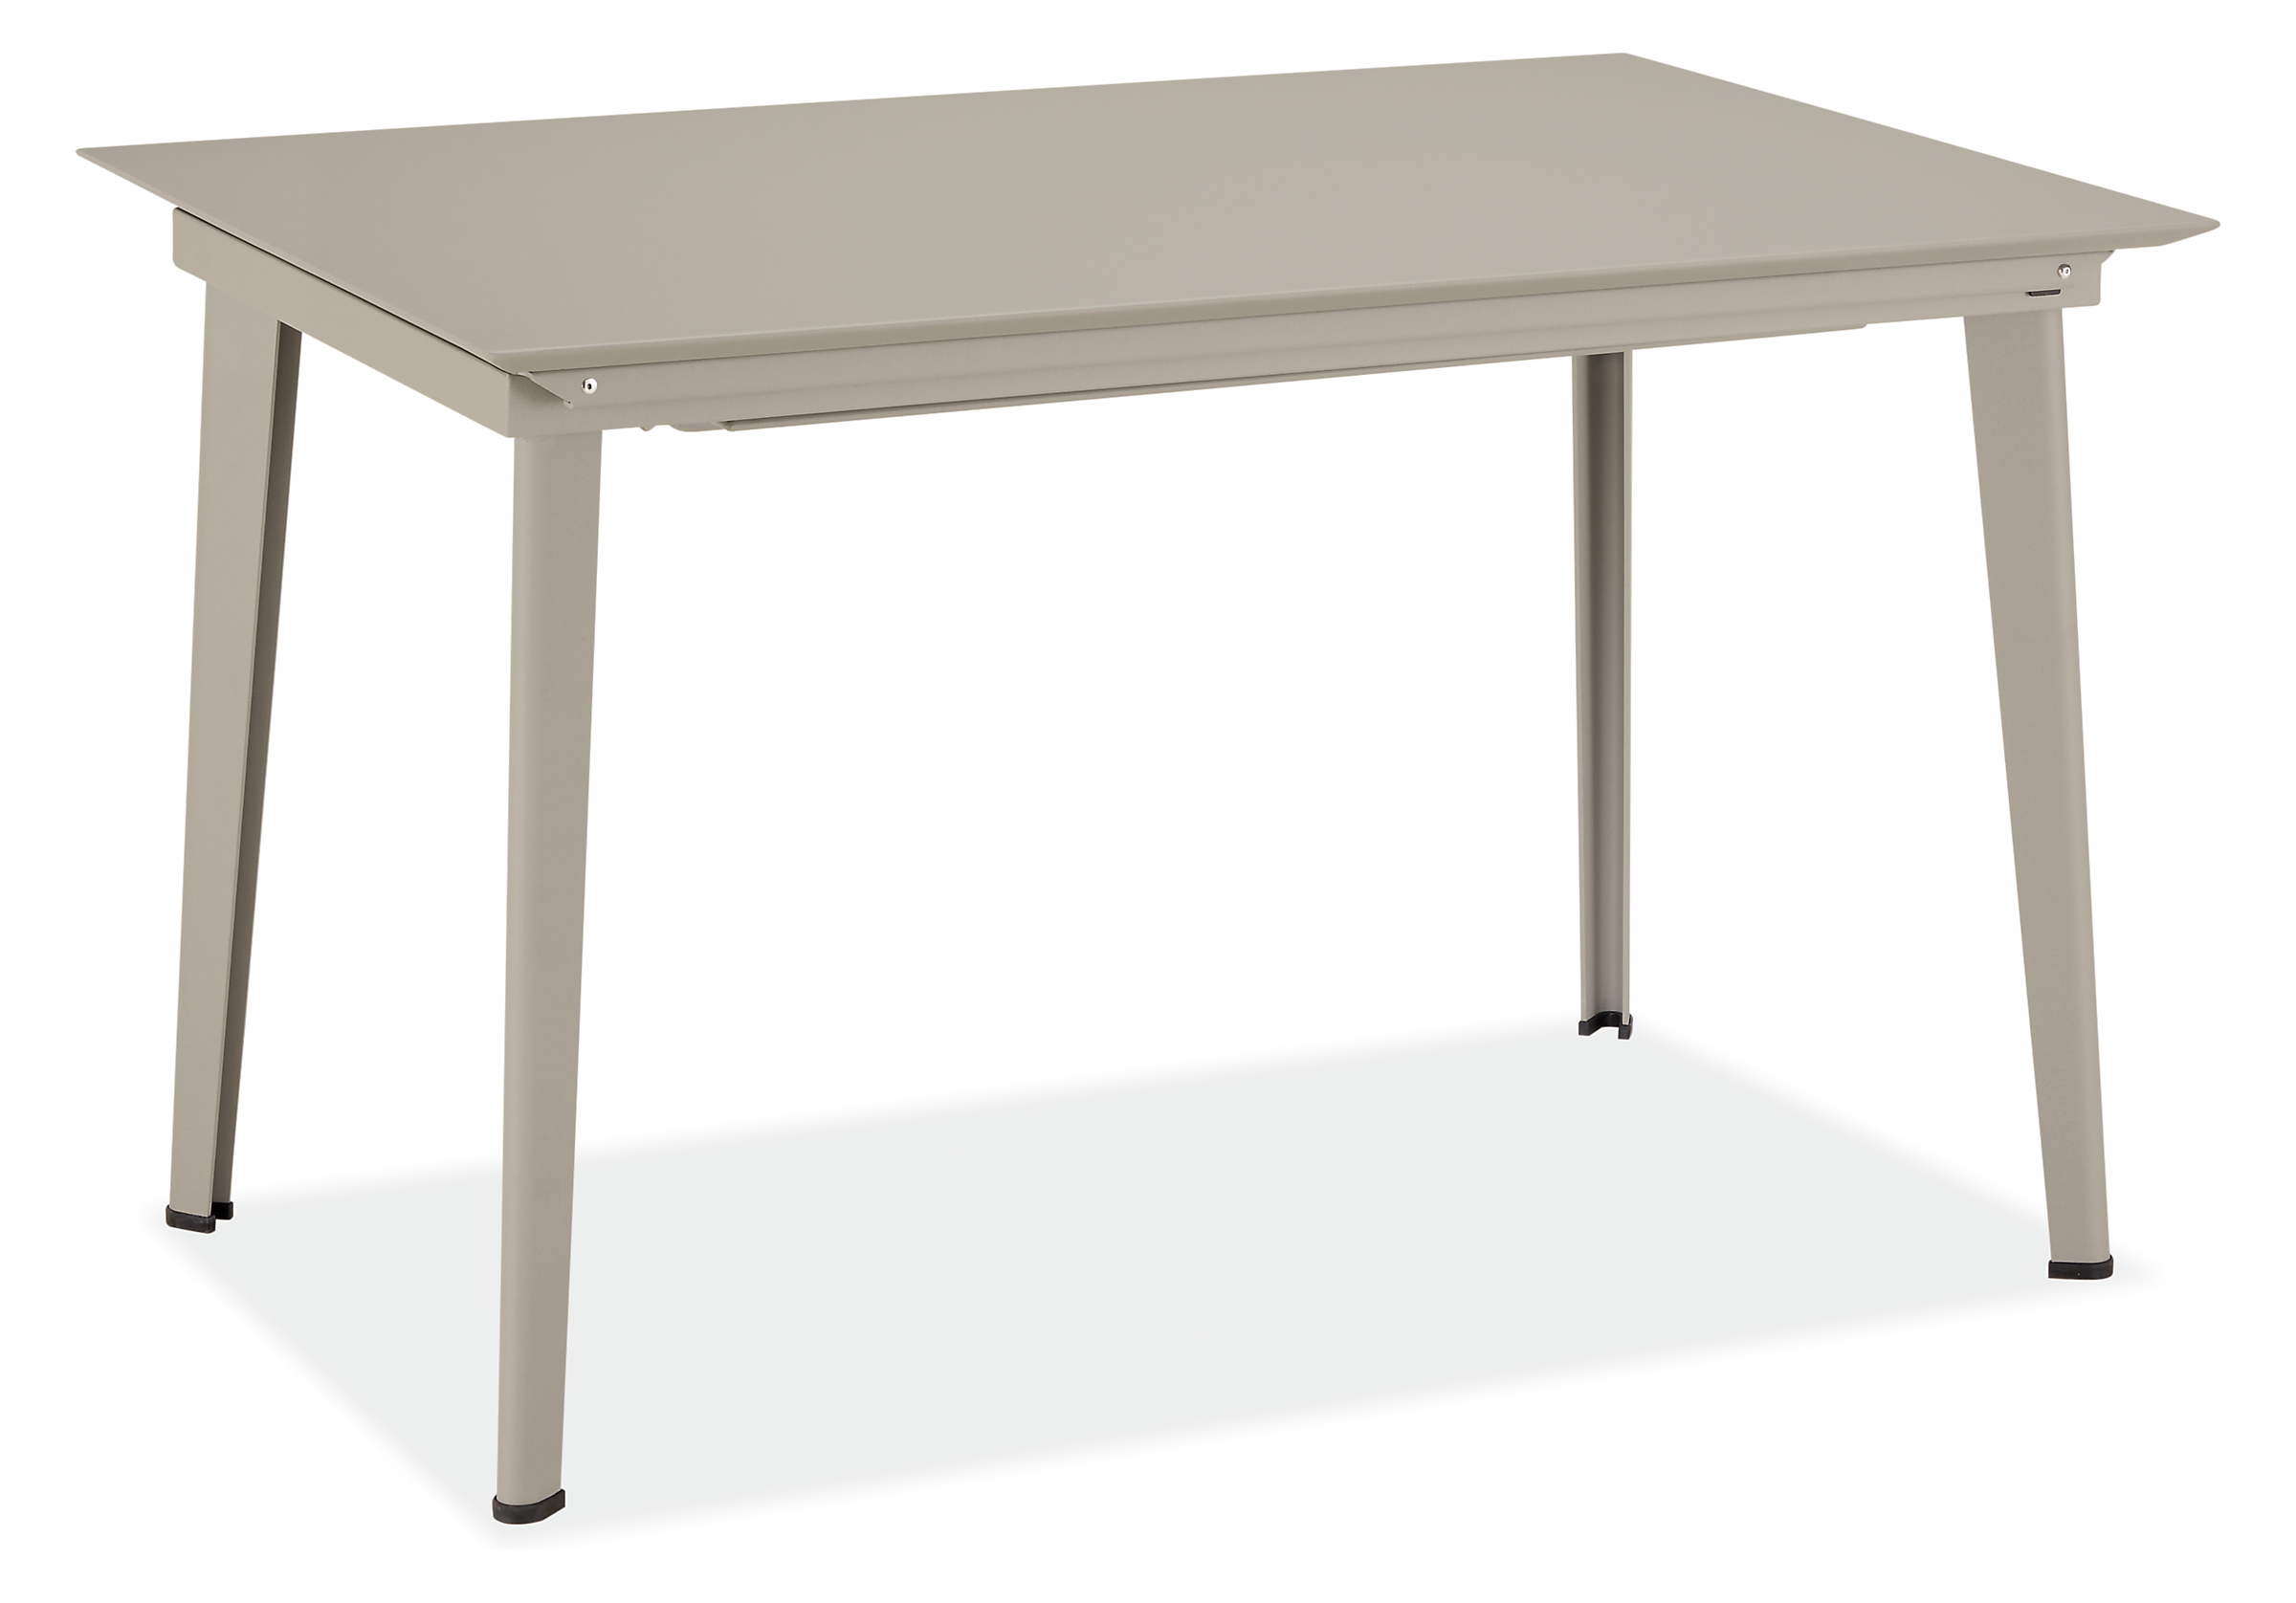 Bauer 47w 31d 29h Extension Table with One 20" Leaf in Flint